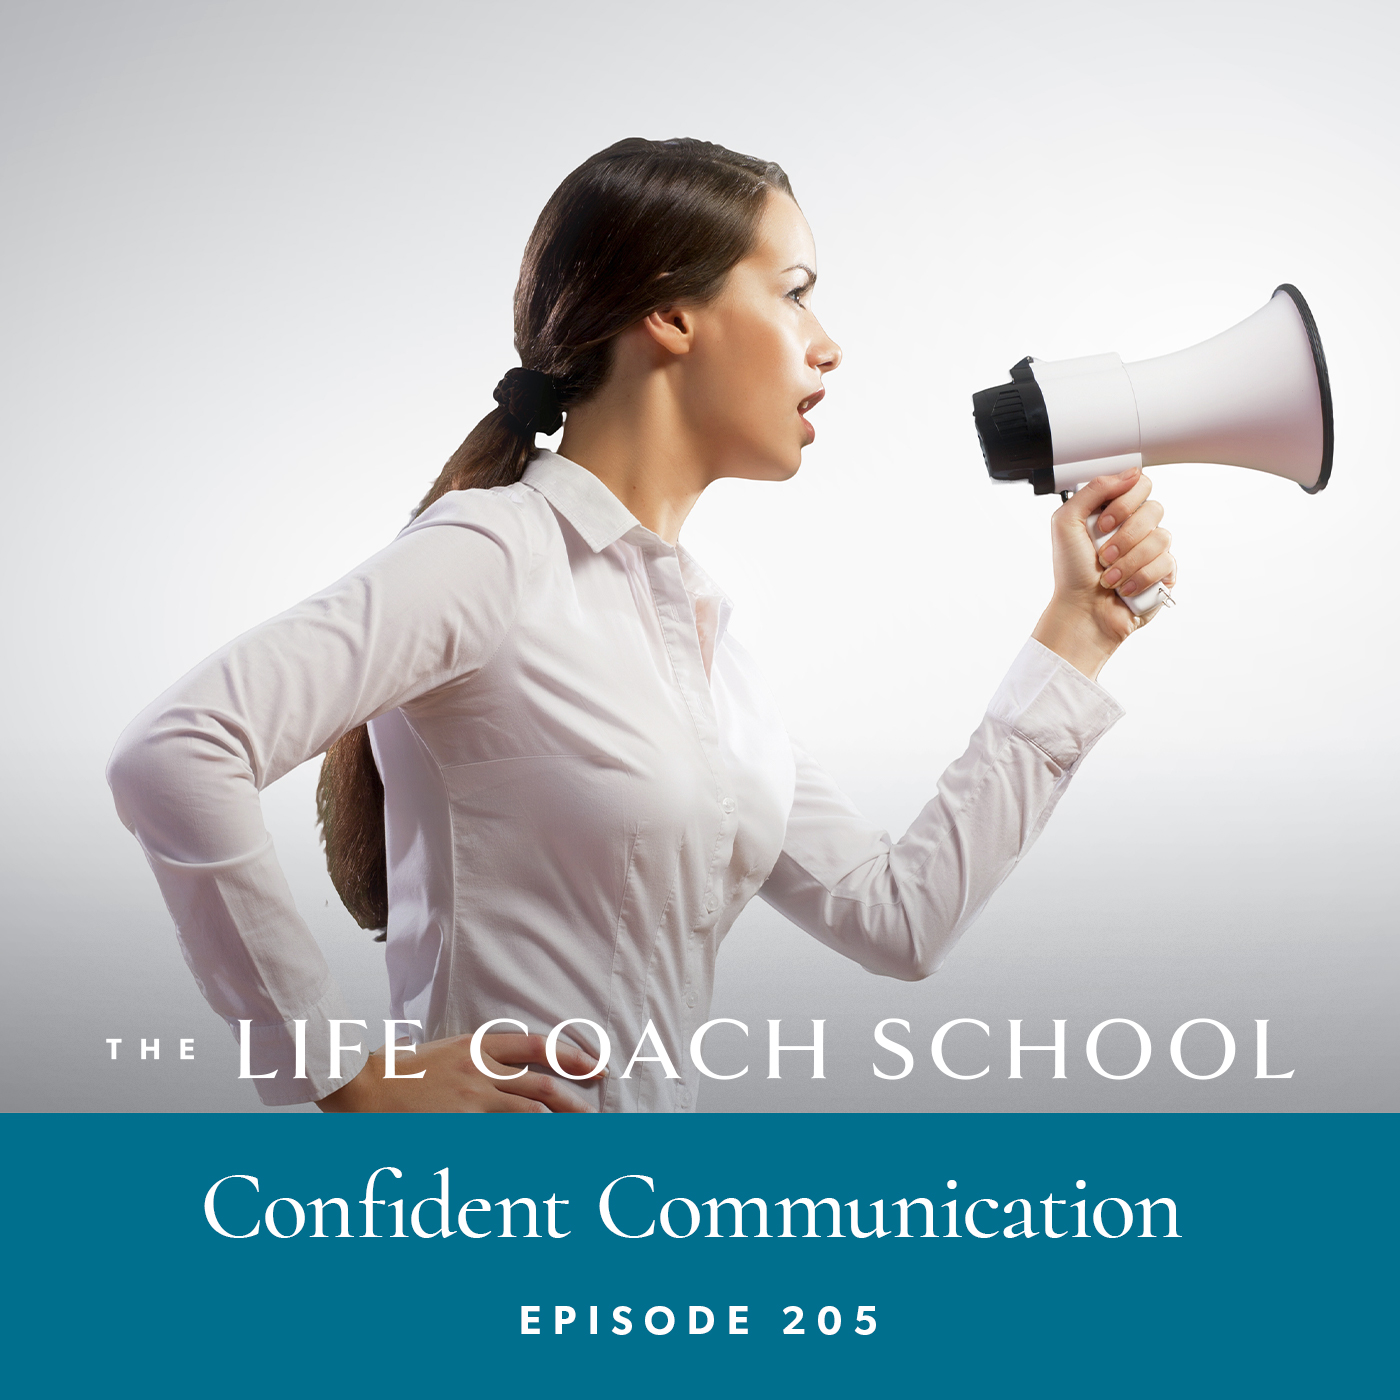 The Life Coach School Podcast with Brooke Castillo | Episode 205 | Confident Communication